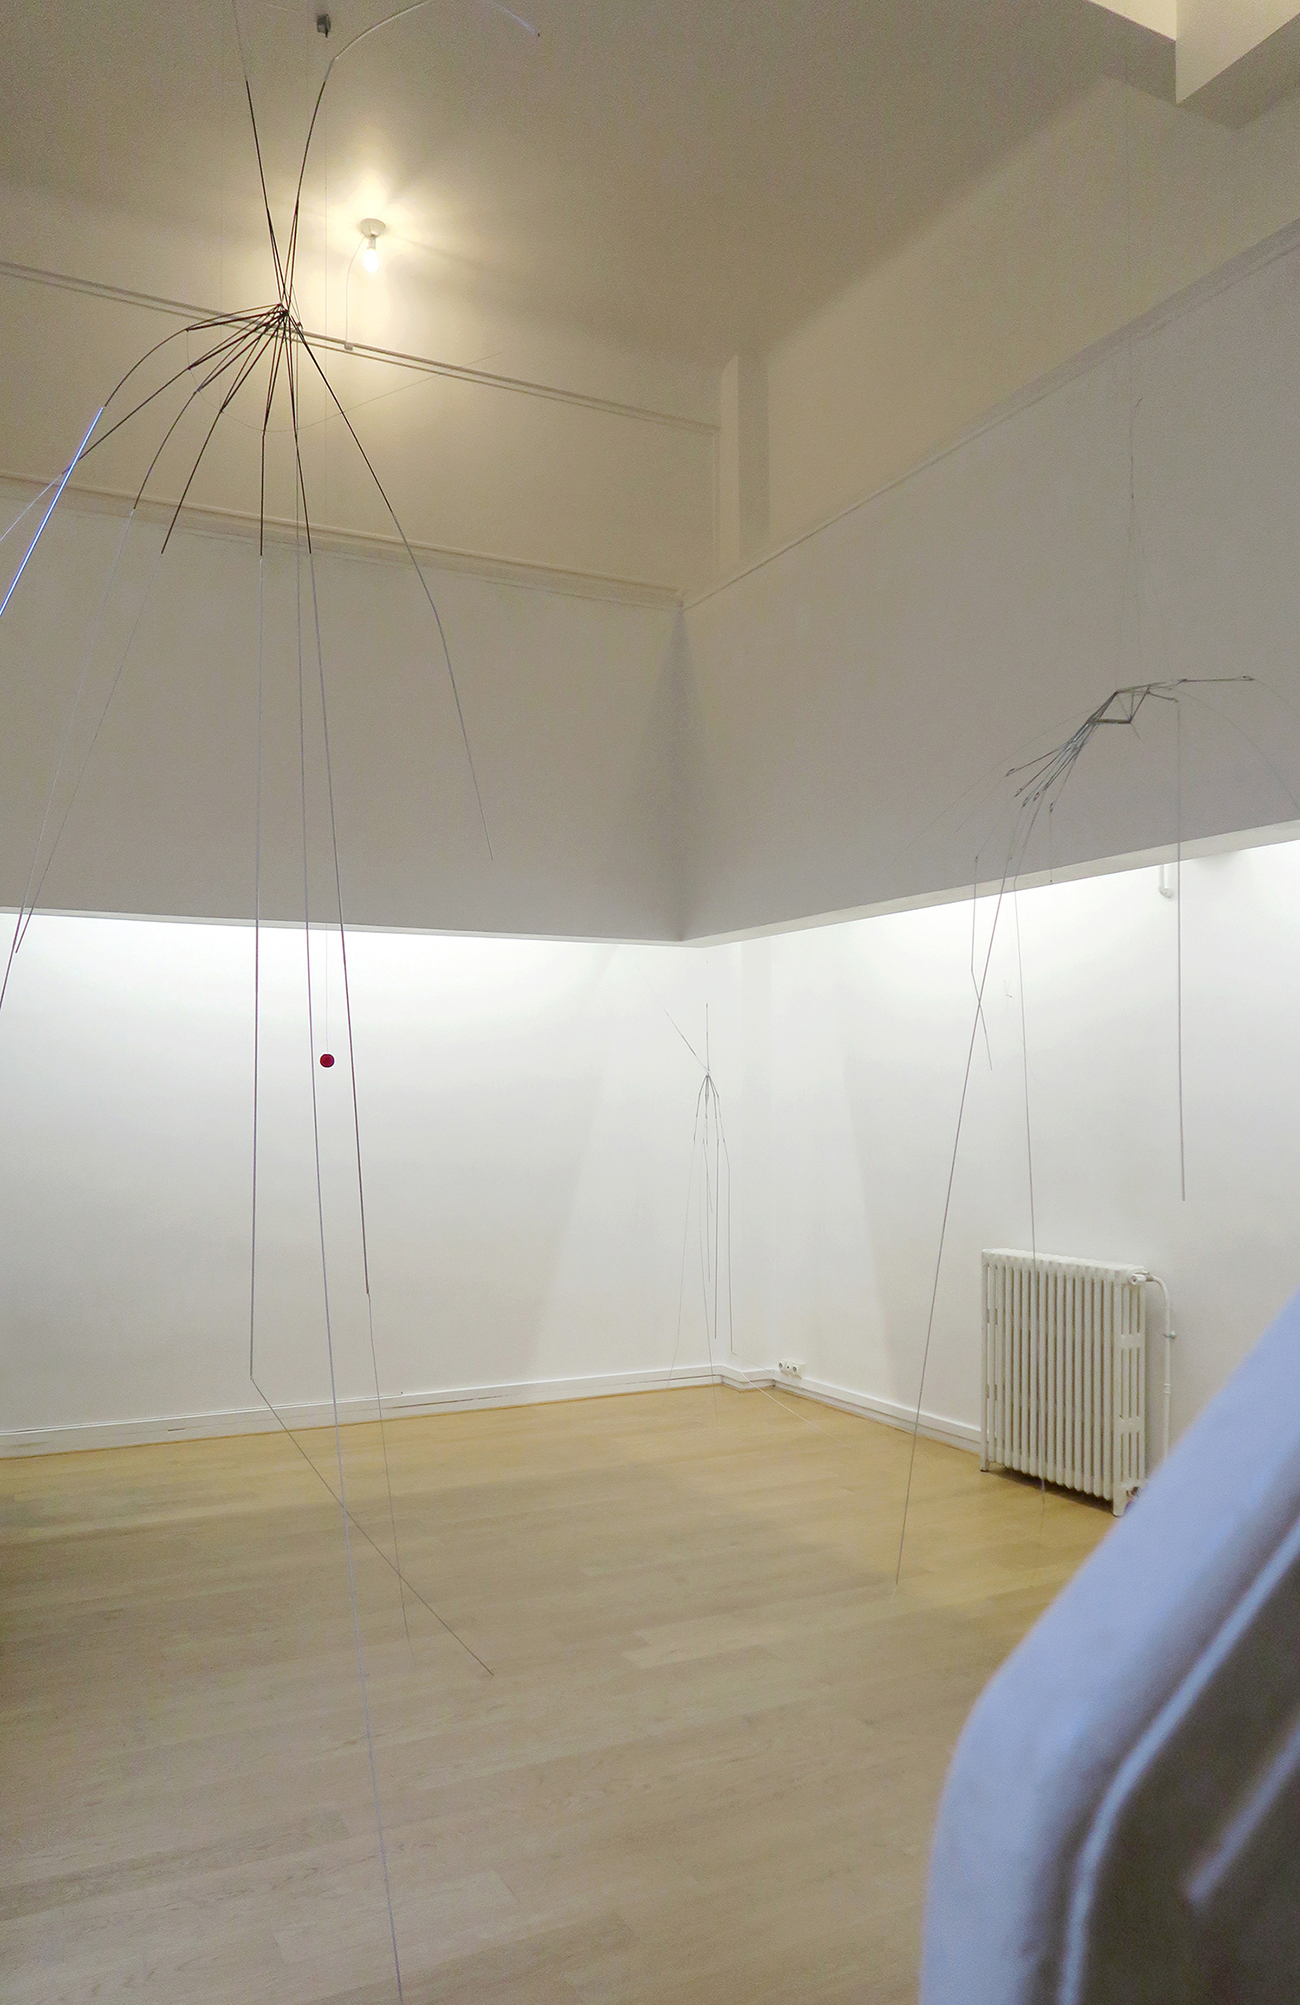 Clémentine Adou, Daddy long legs’ hands, exhibition view